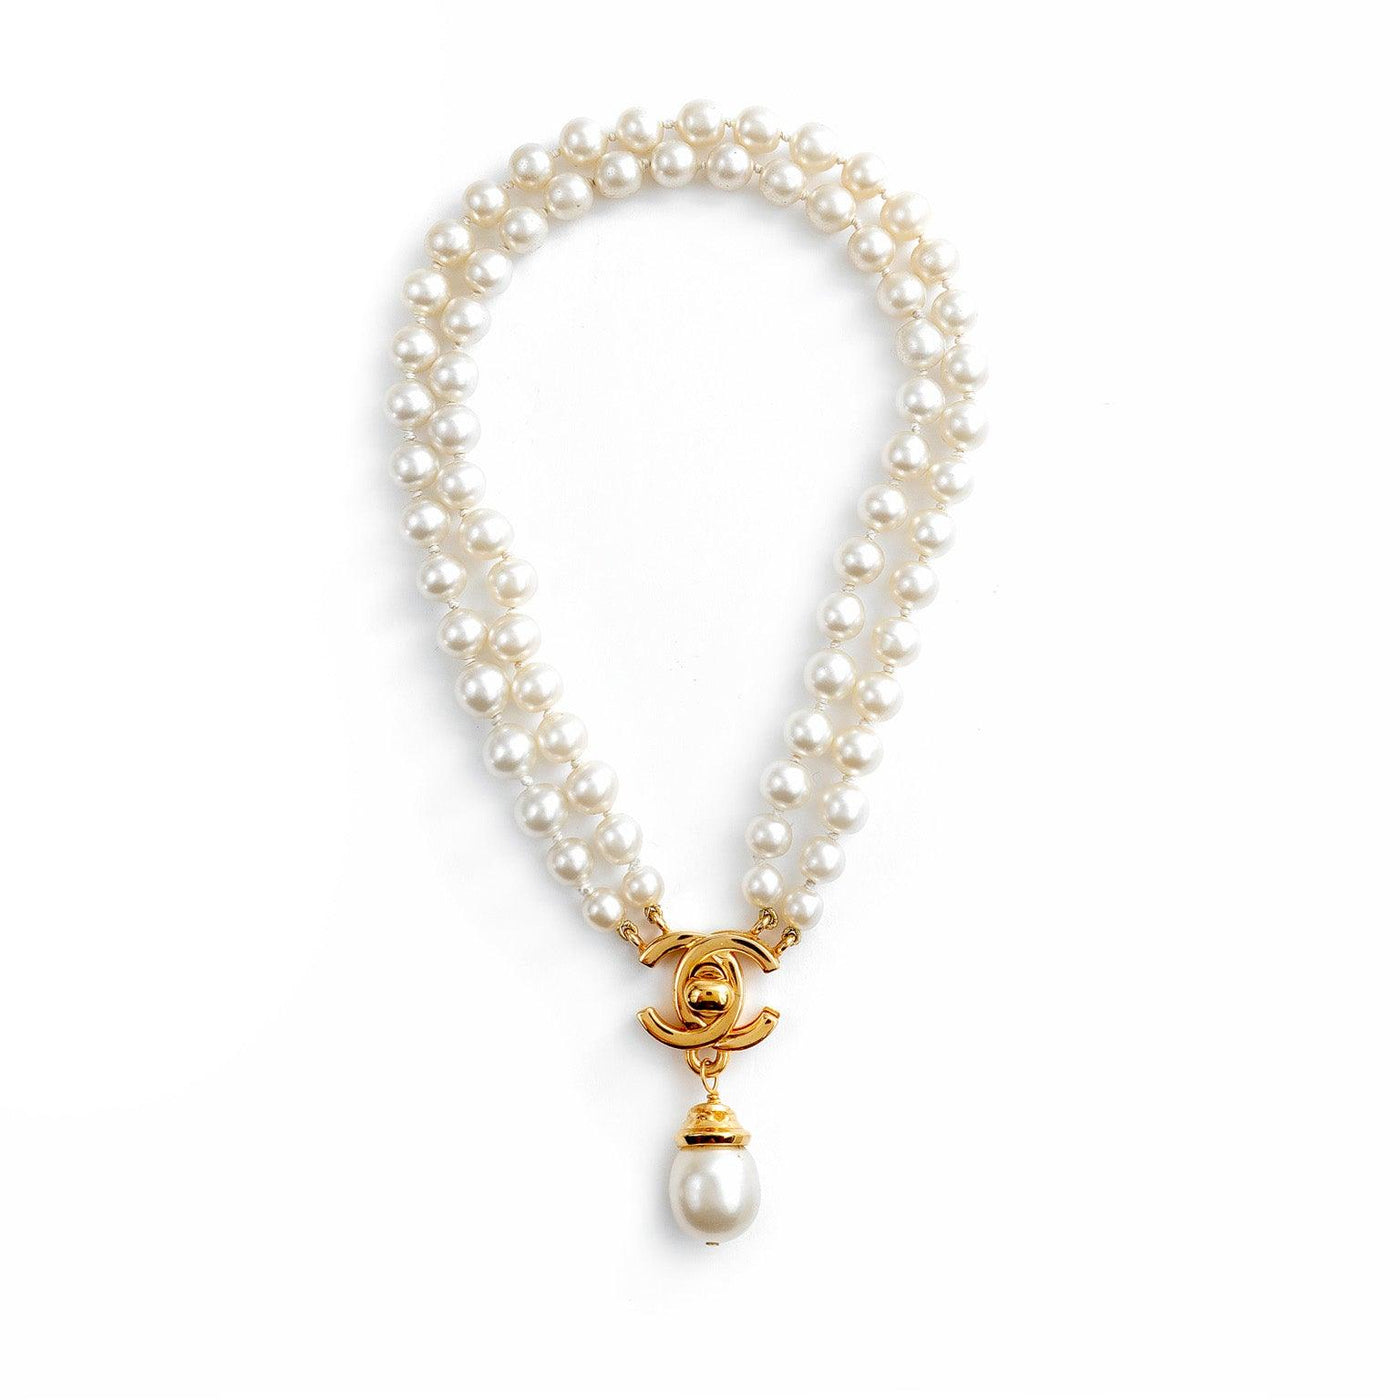 Chanel Pearls 24k Gold Plated w/ CC Lock Necklace - Only Authentics